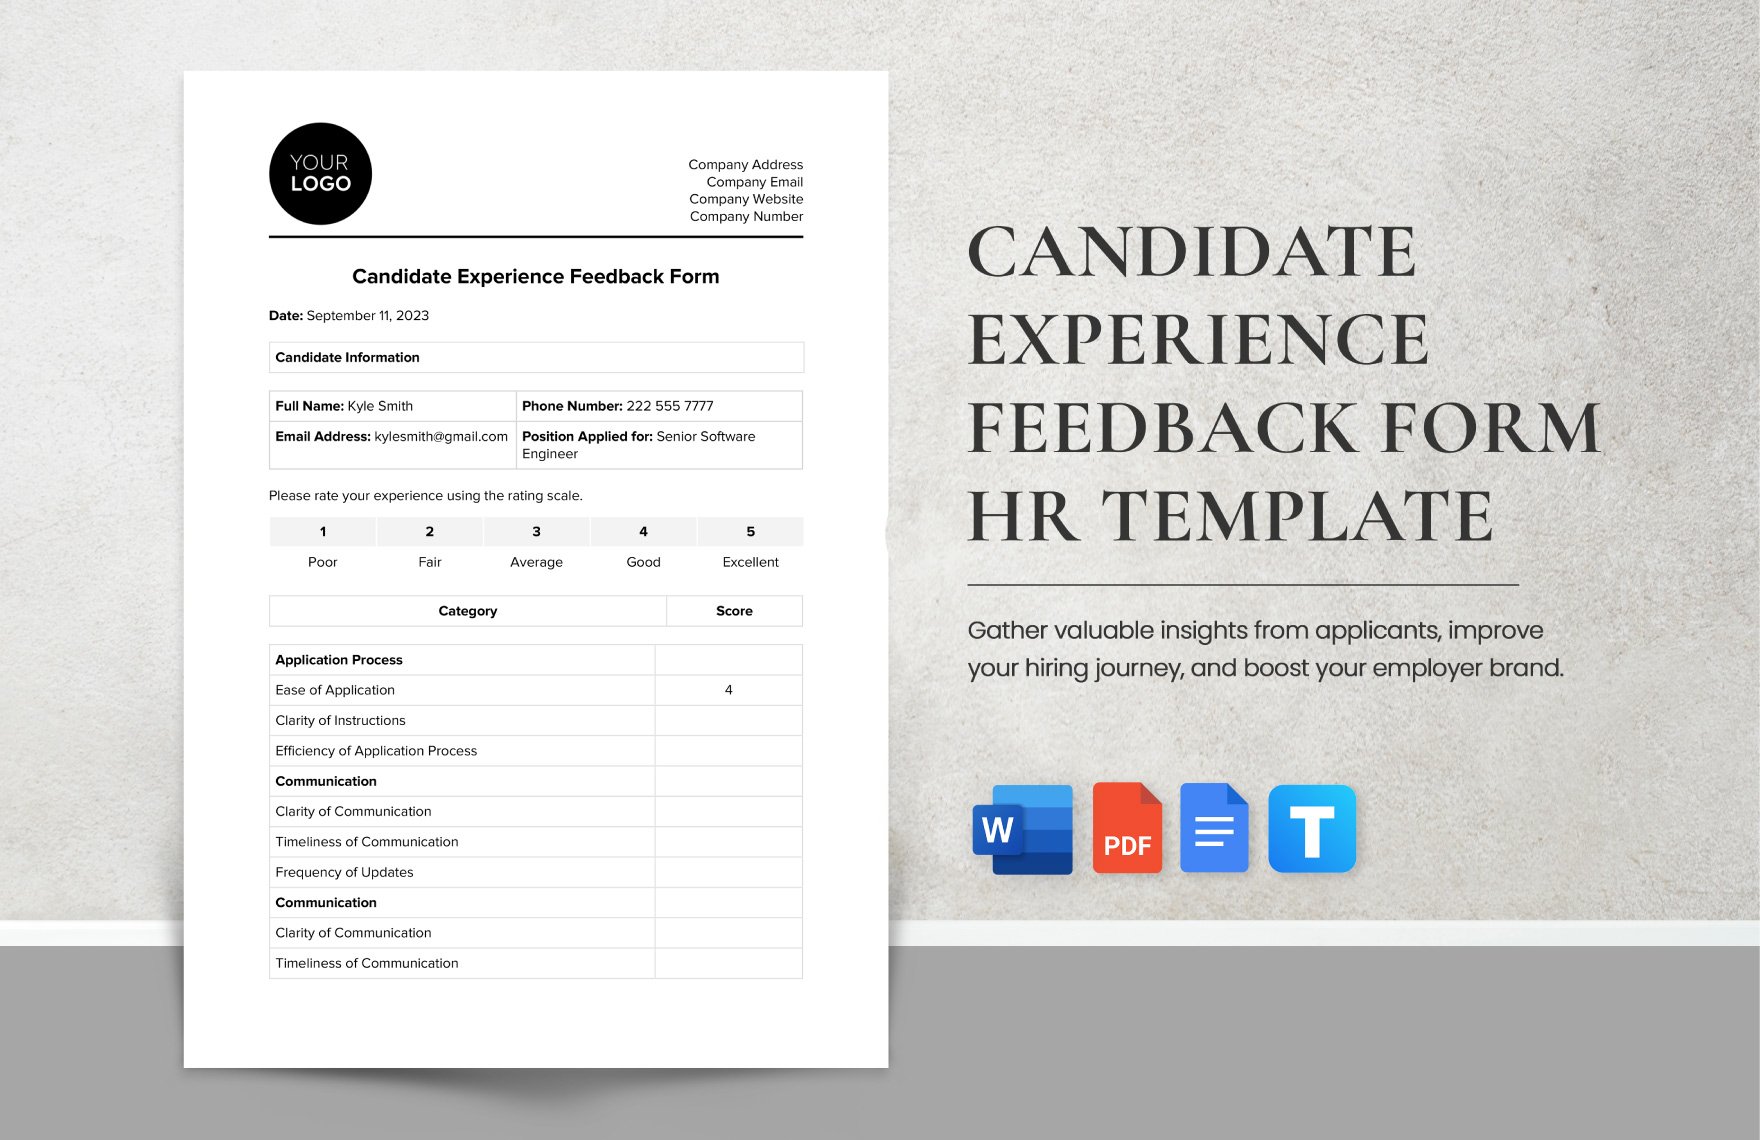 Candidate Experience Feedback Form HR Template